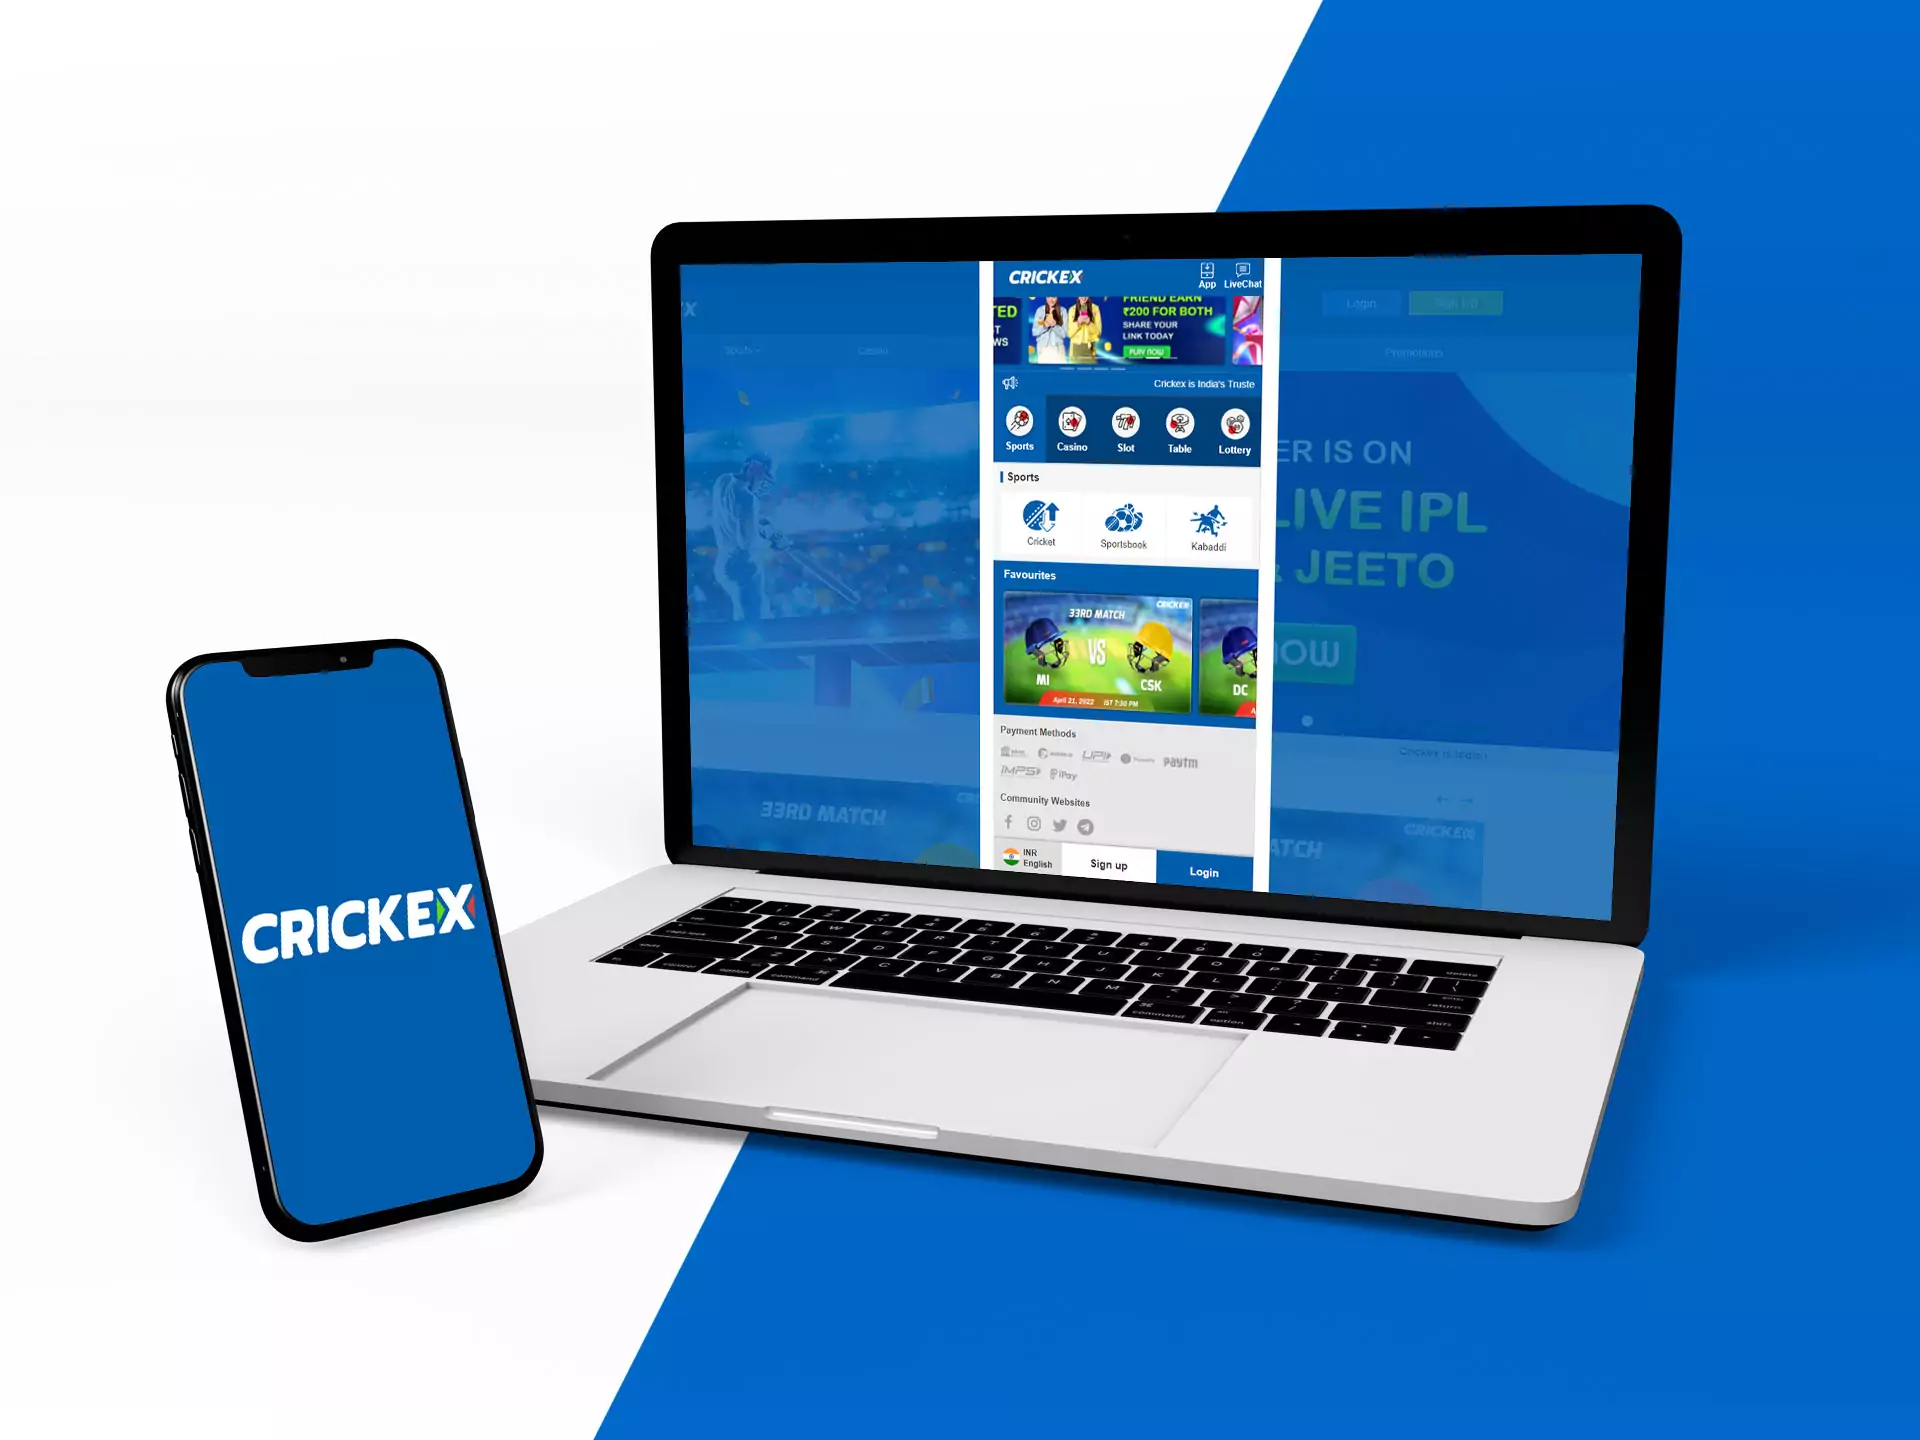 The mobile version of the Crickex website is a good alternative to the app.